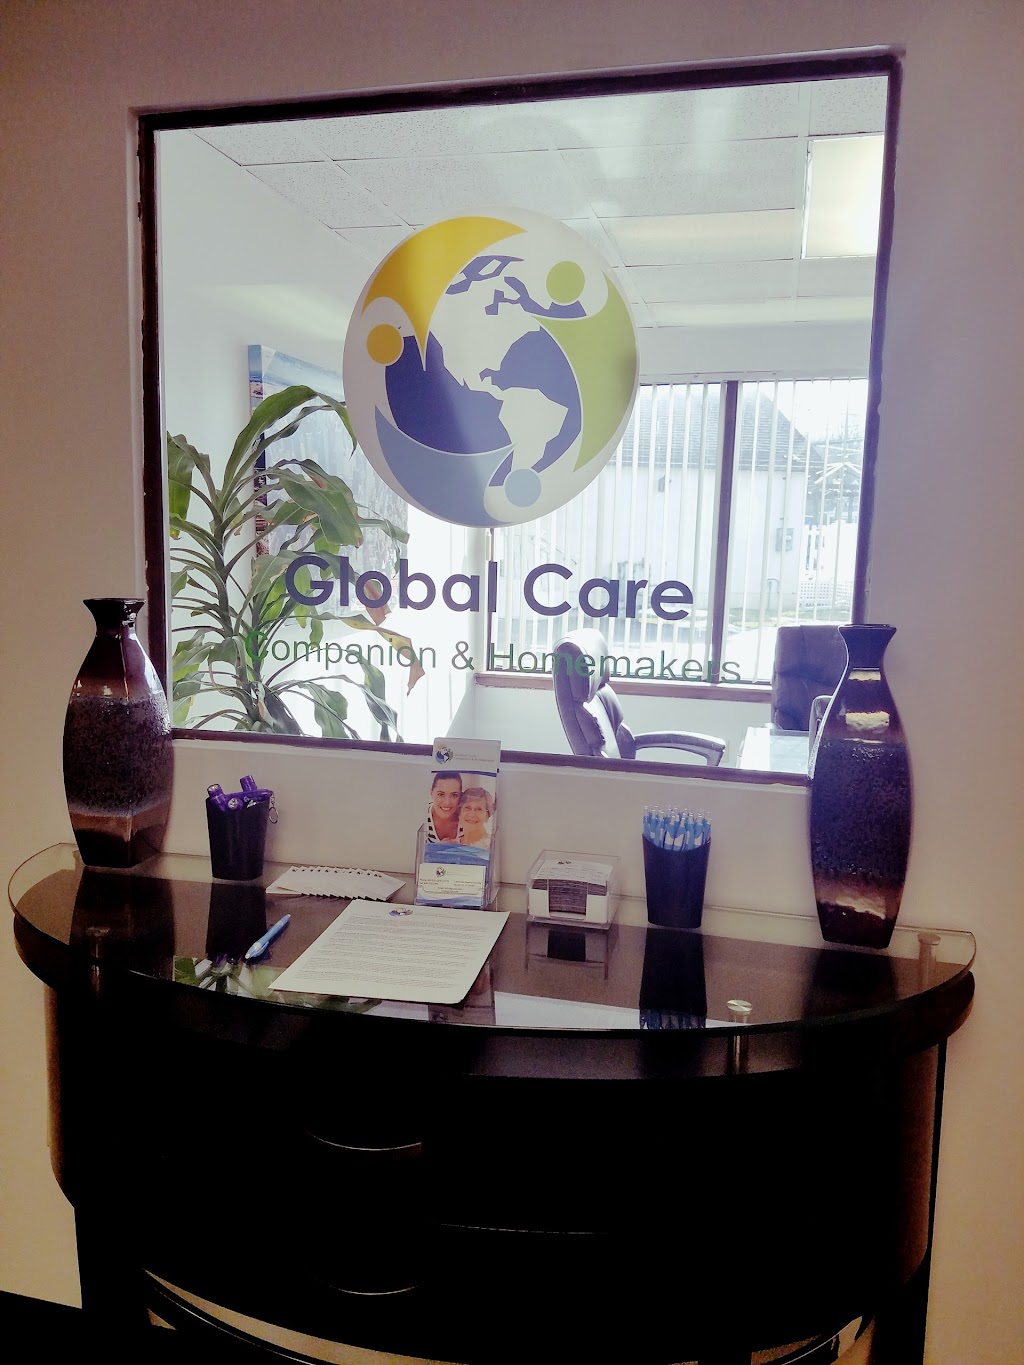 Global Care Companion and Homemakers | 1850 Silas Deane Hwy, Rocky Hill, CT 06067 | Phone: (860) 529-2273